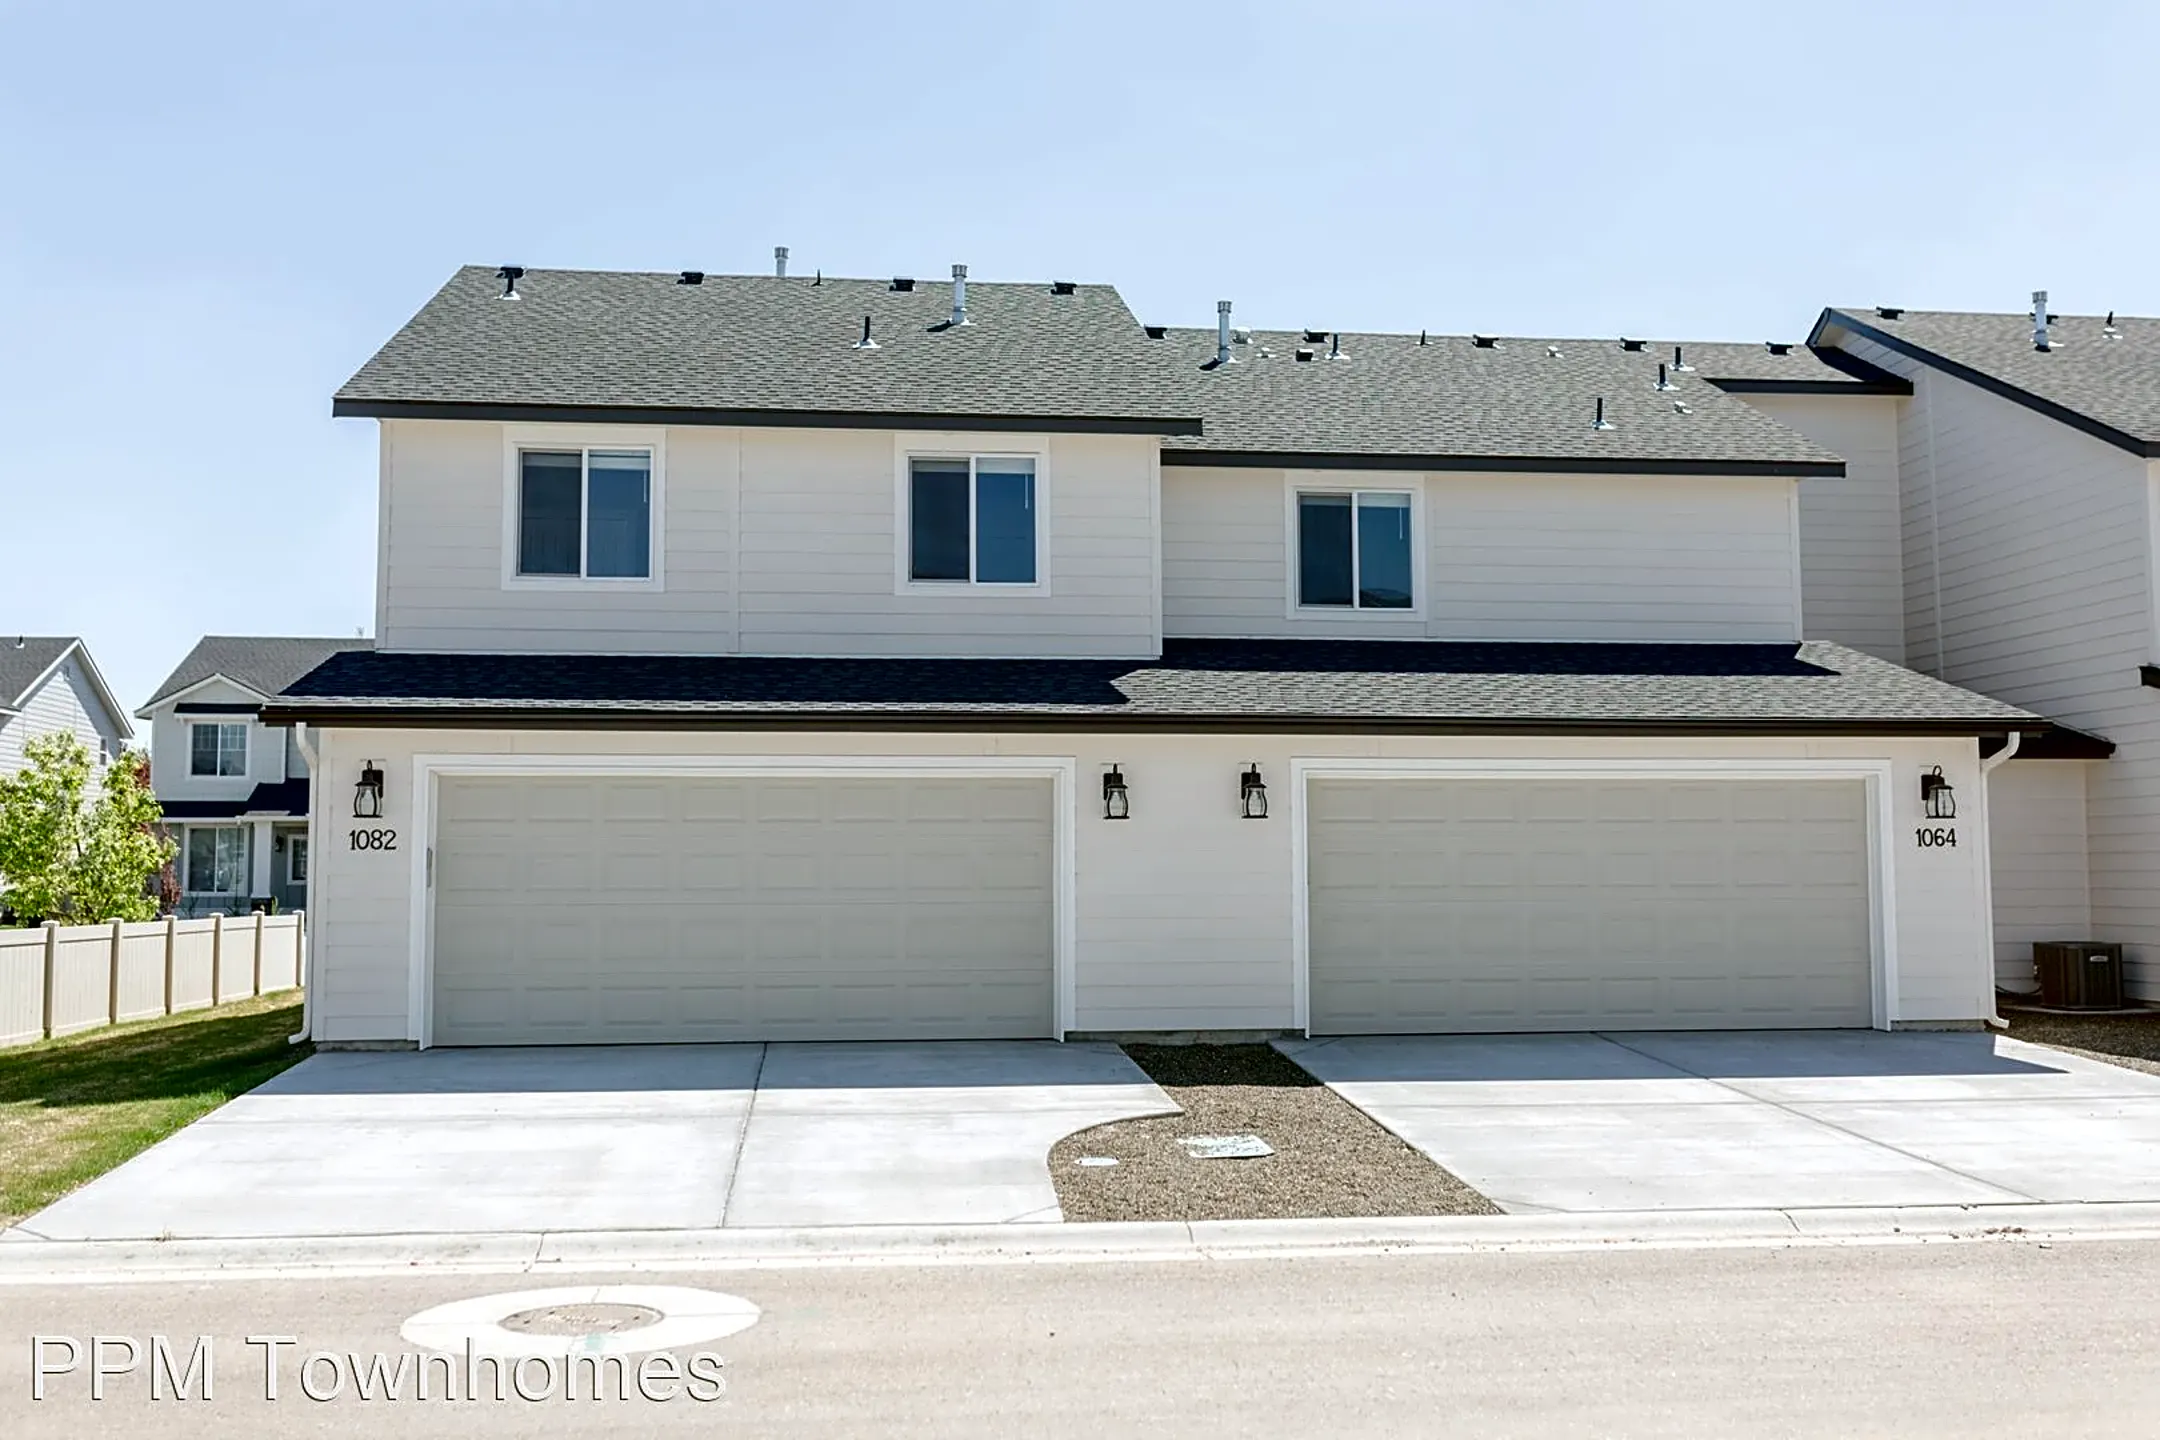 Building - Townhomes at Jericho- Meridian Idaho 83642 - Meridian, ID